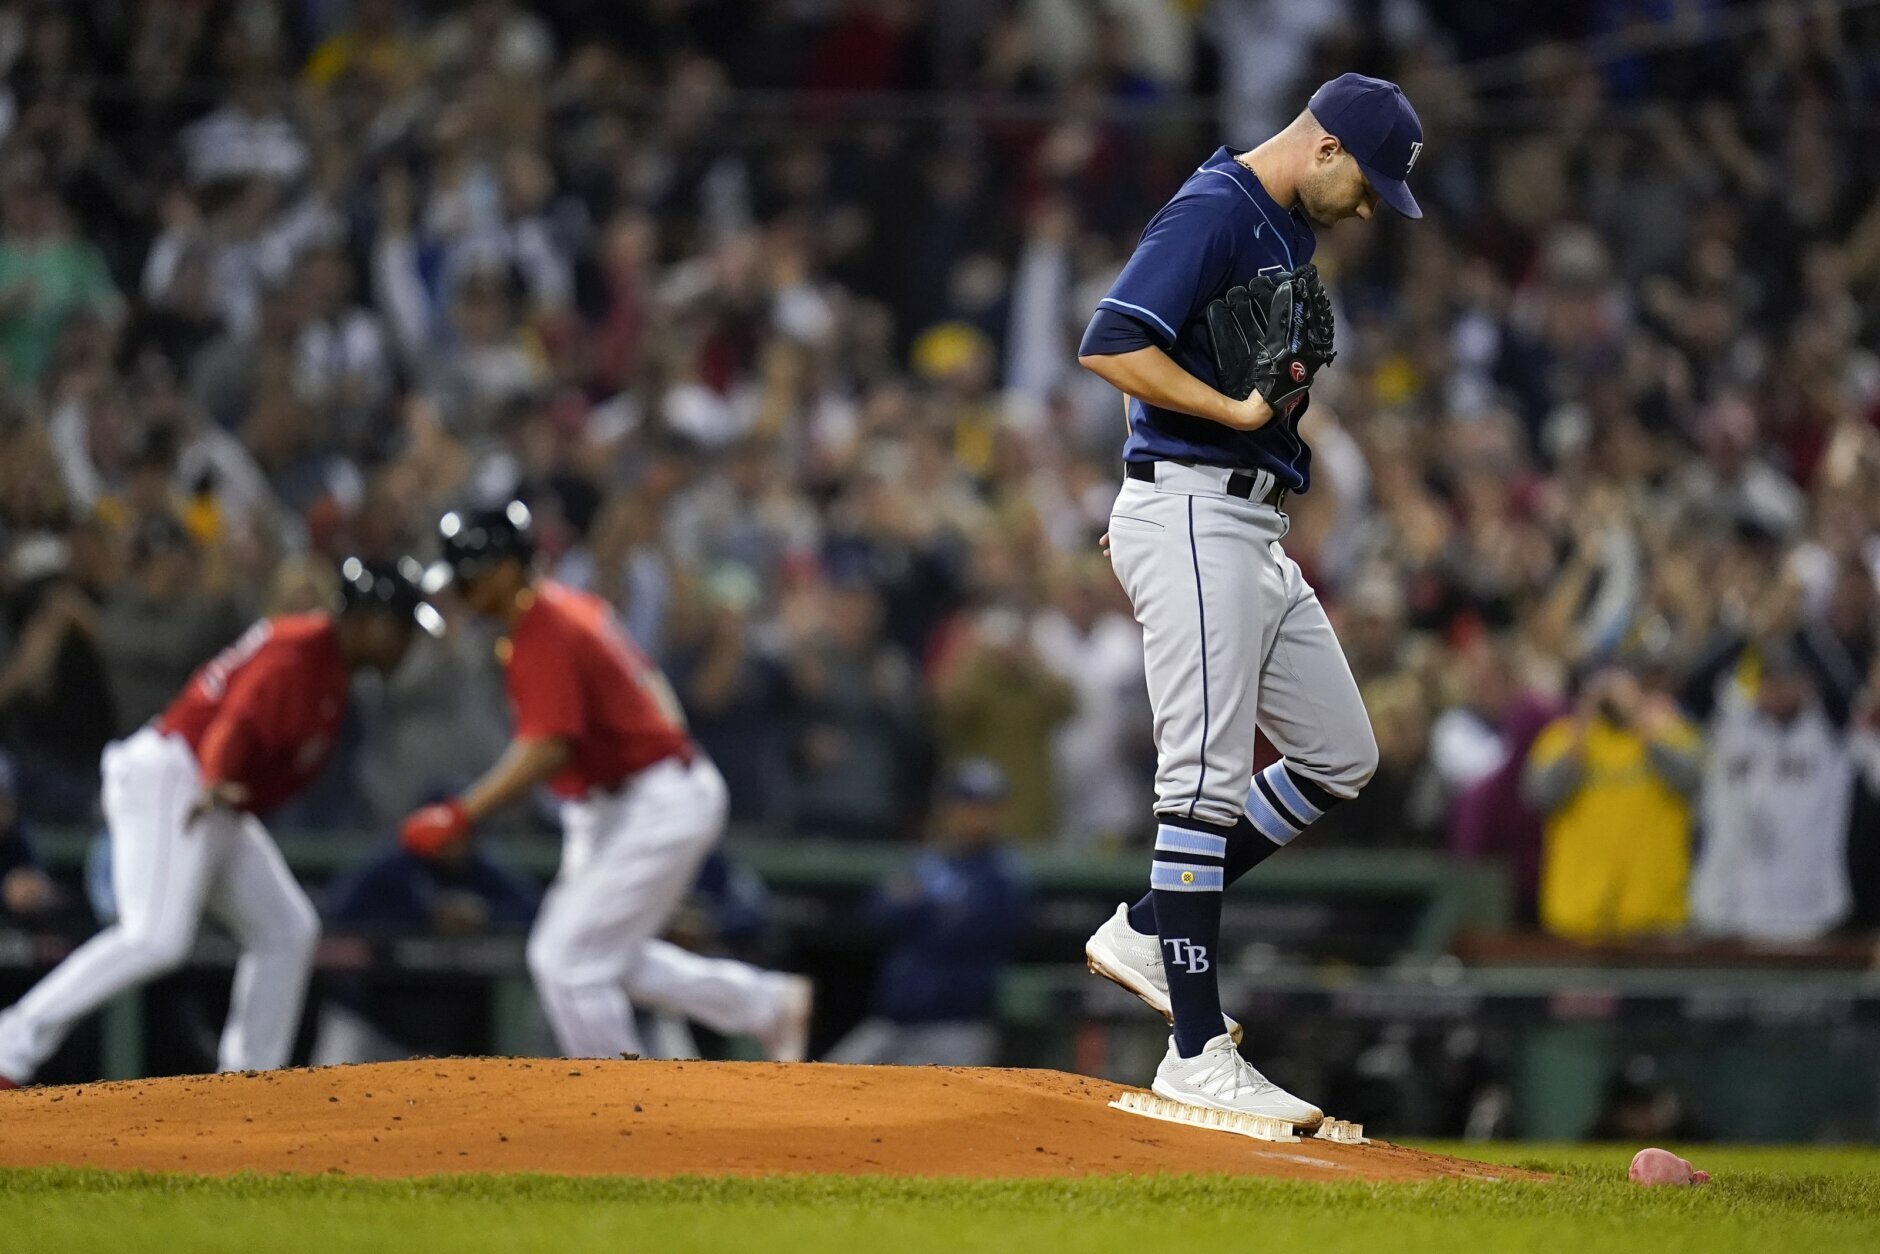 Walk it off: Red Sox eliminate Rays 6-5 with late sac fly - WTOP News